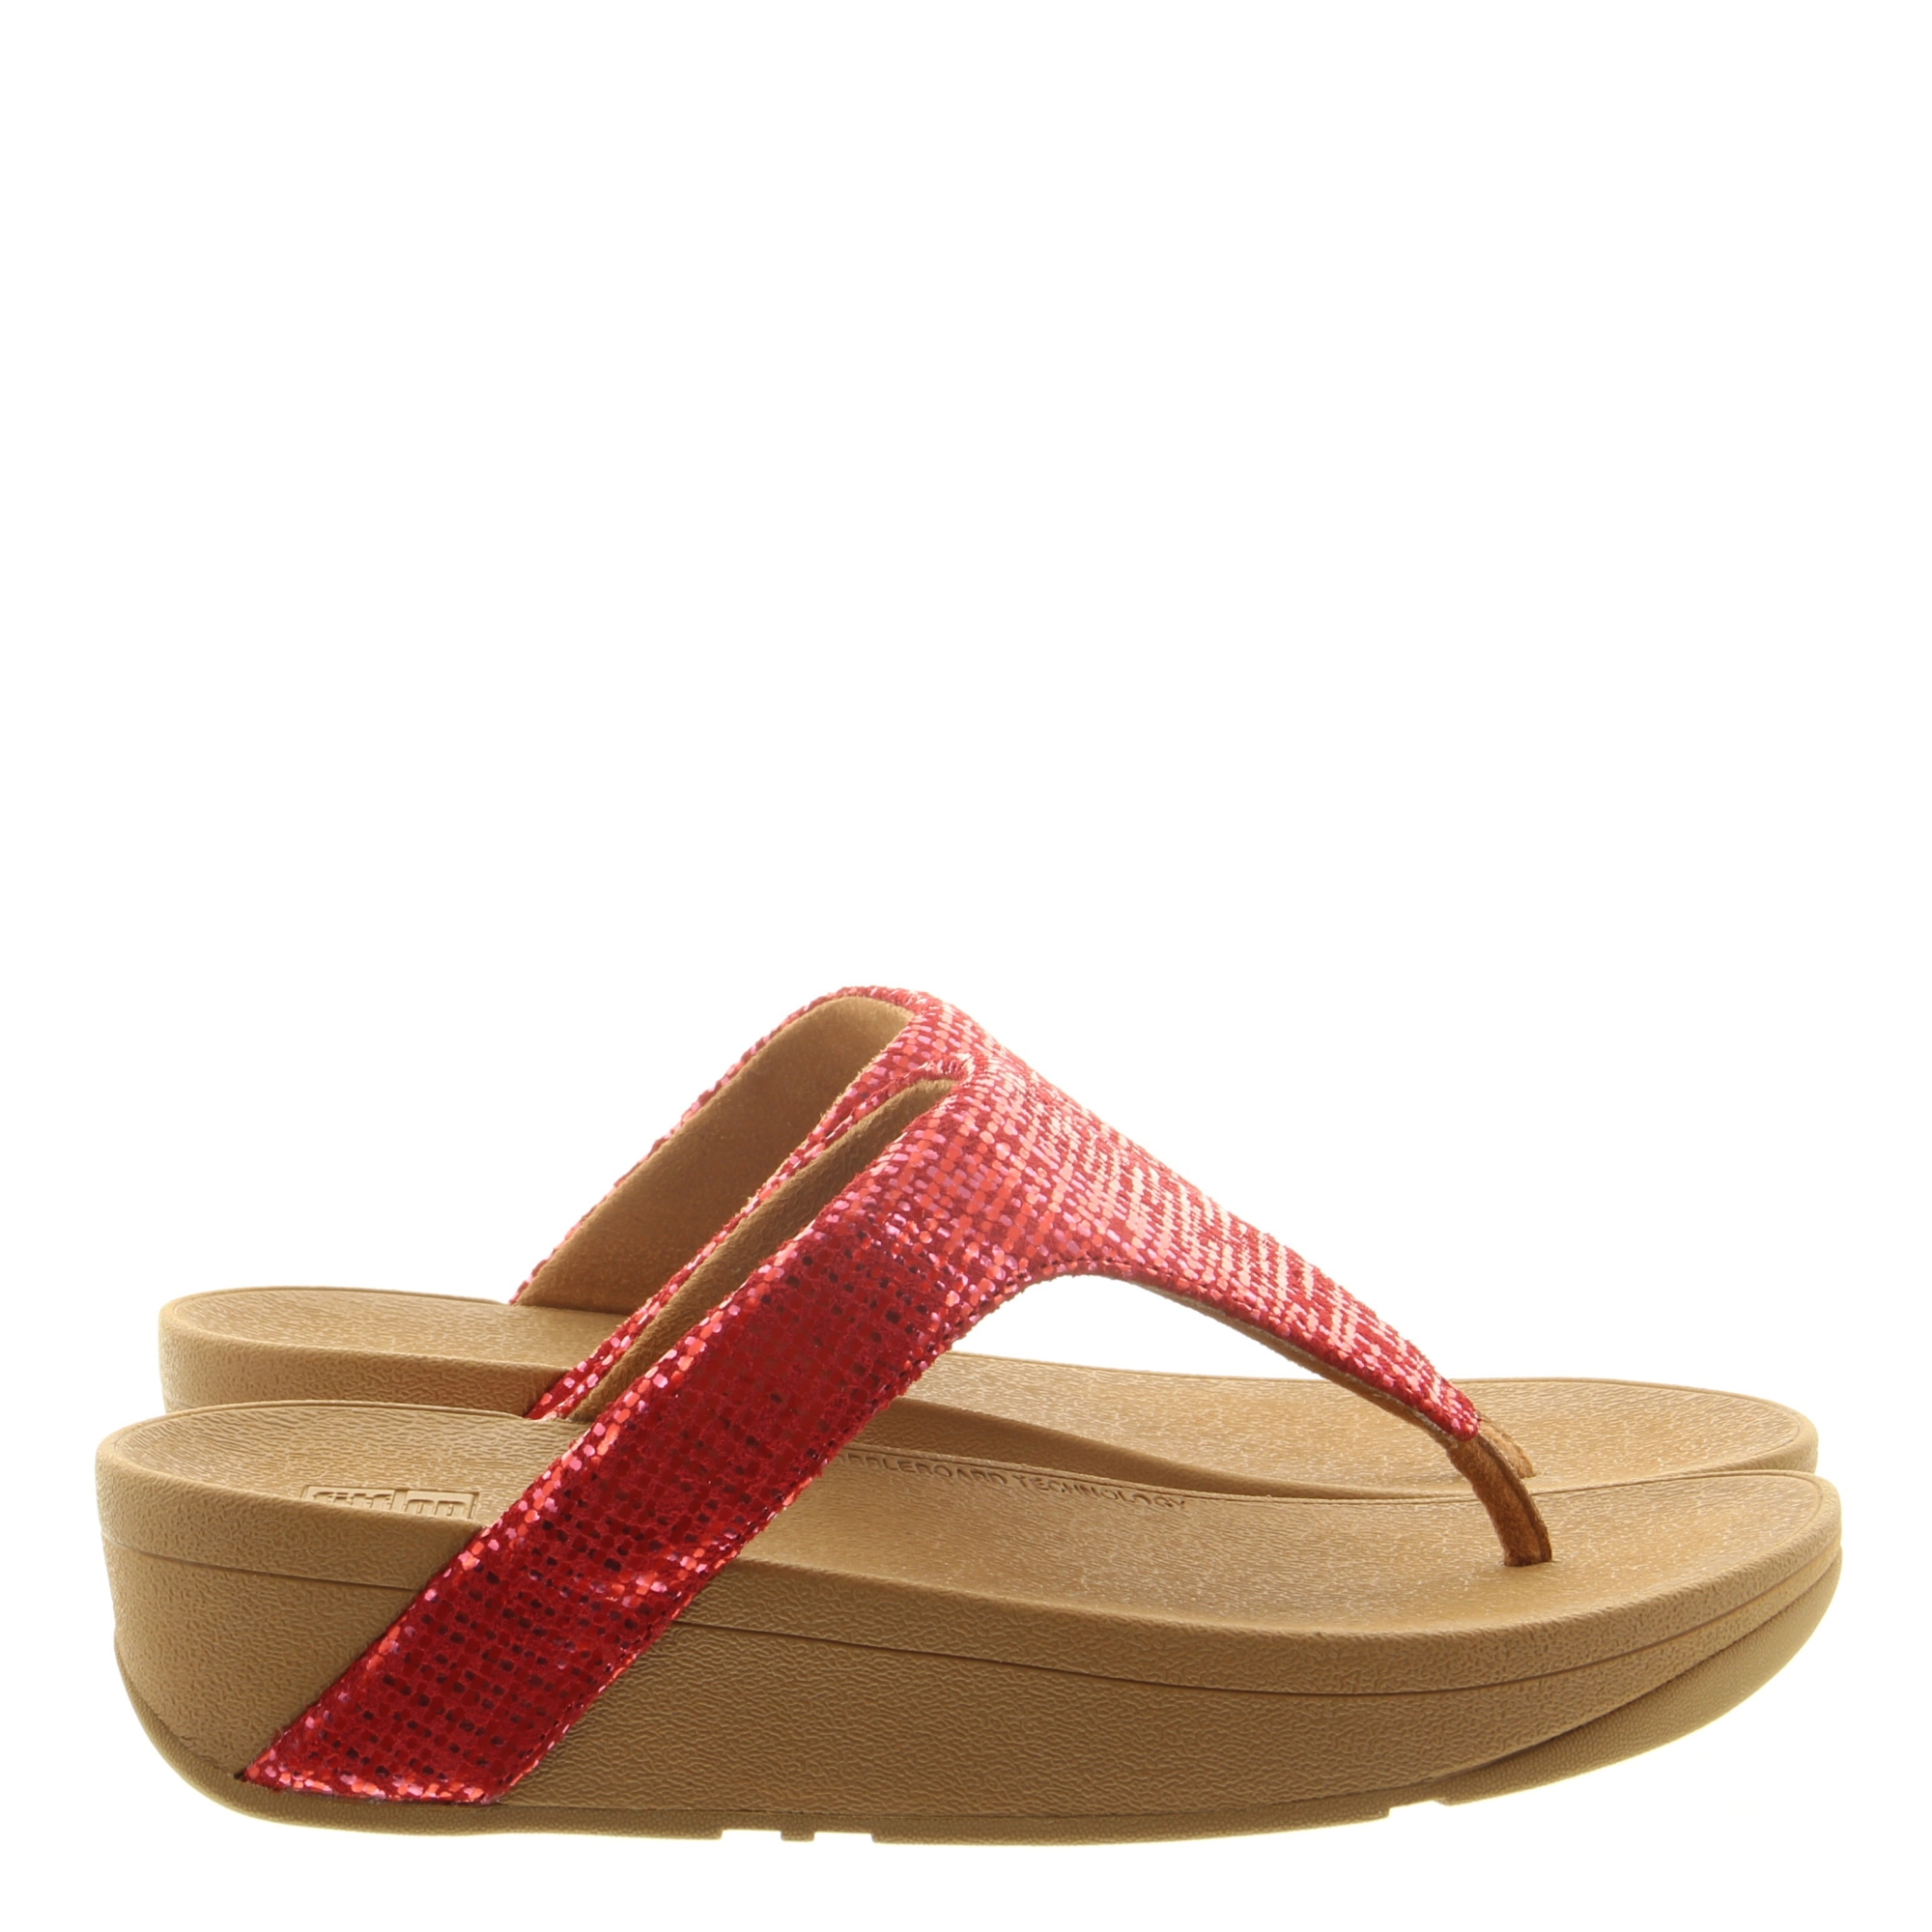 Fitflop Lottie Chain Print Toe Post red